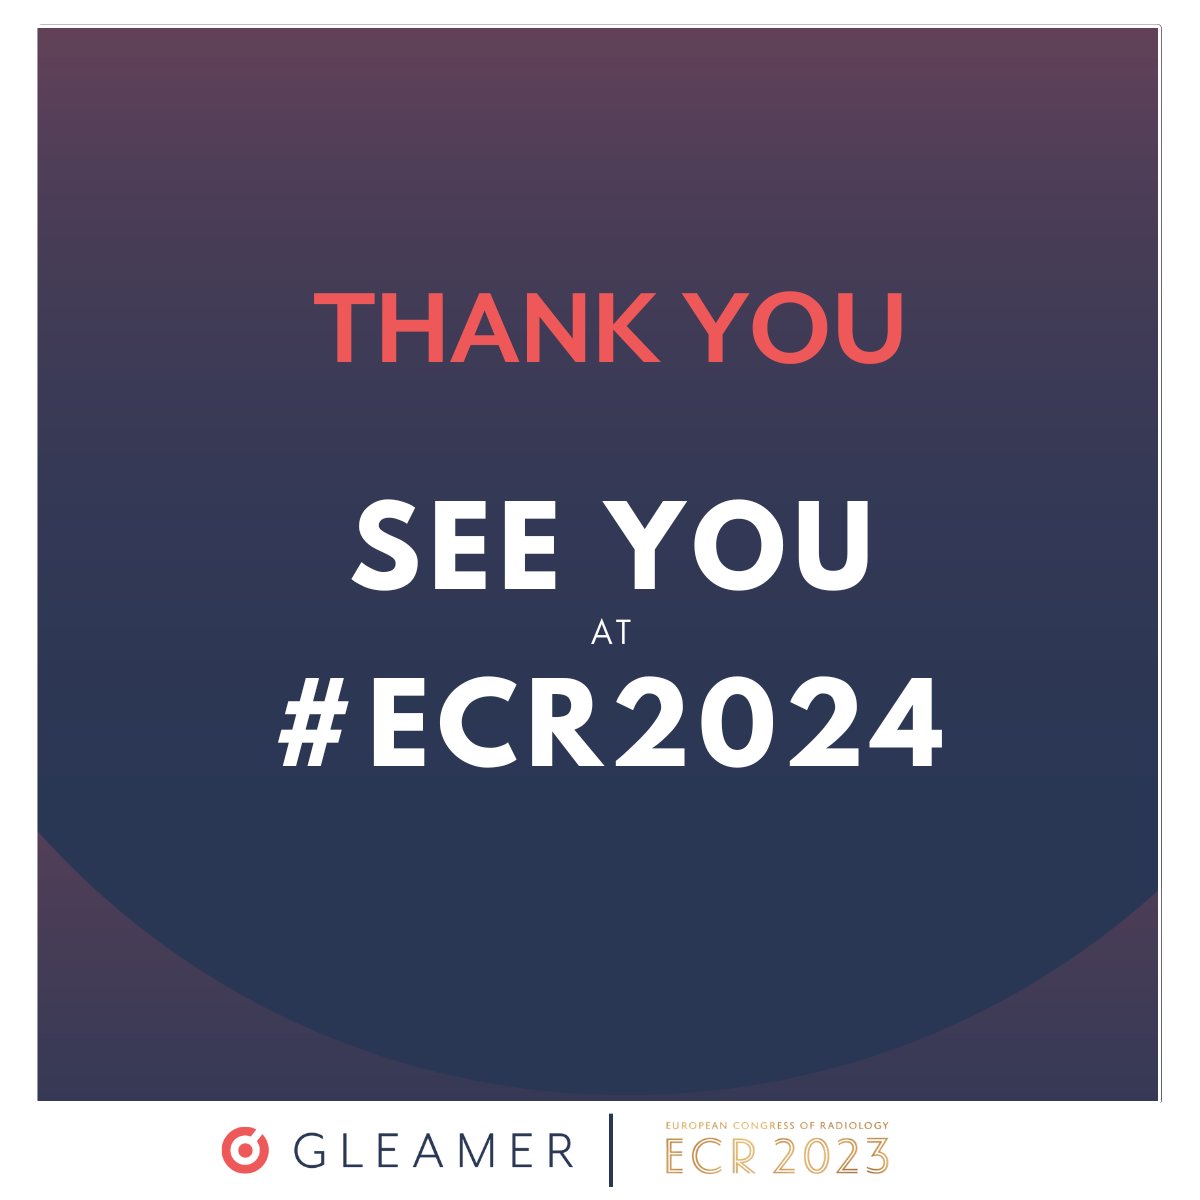 🎉 A huge Thanks 👏 to all our guests who joined us during the past 4⃣ days! We were thrilled to have shared our latest solutions 🦴 and news with you at #ECR2023. 
We look forward to seeing you at the next edition of #ECR! 🇪🇺💫
#ai #artificialintelligence #EuropeanRadiology